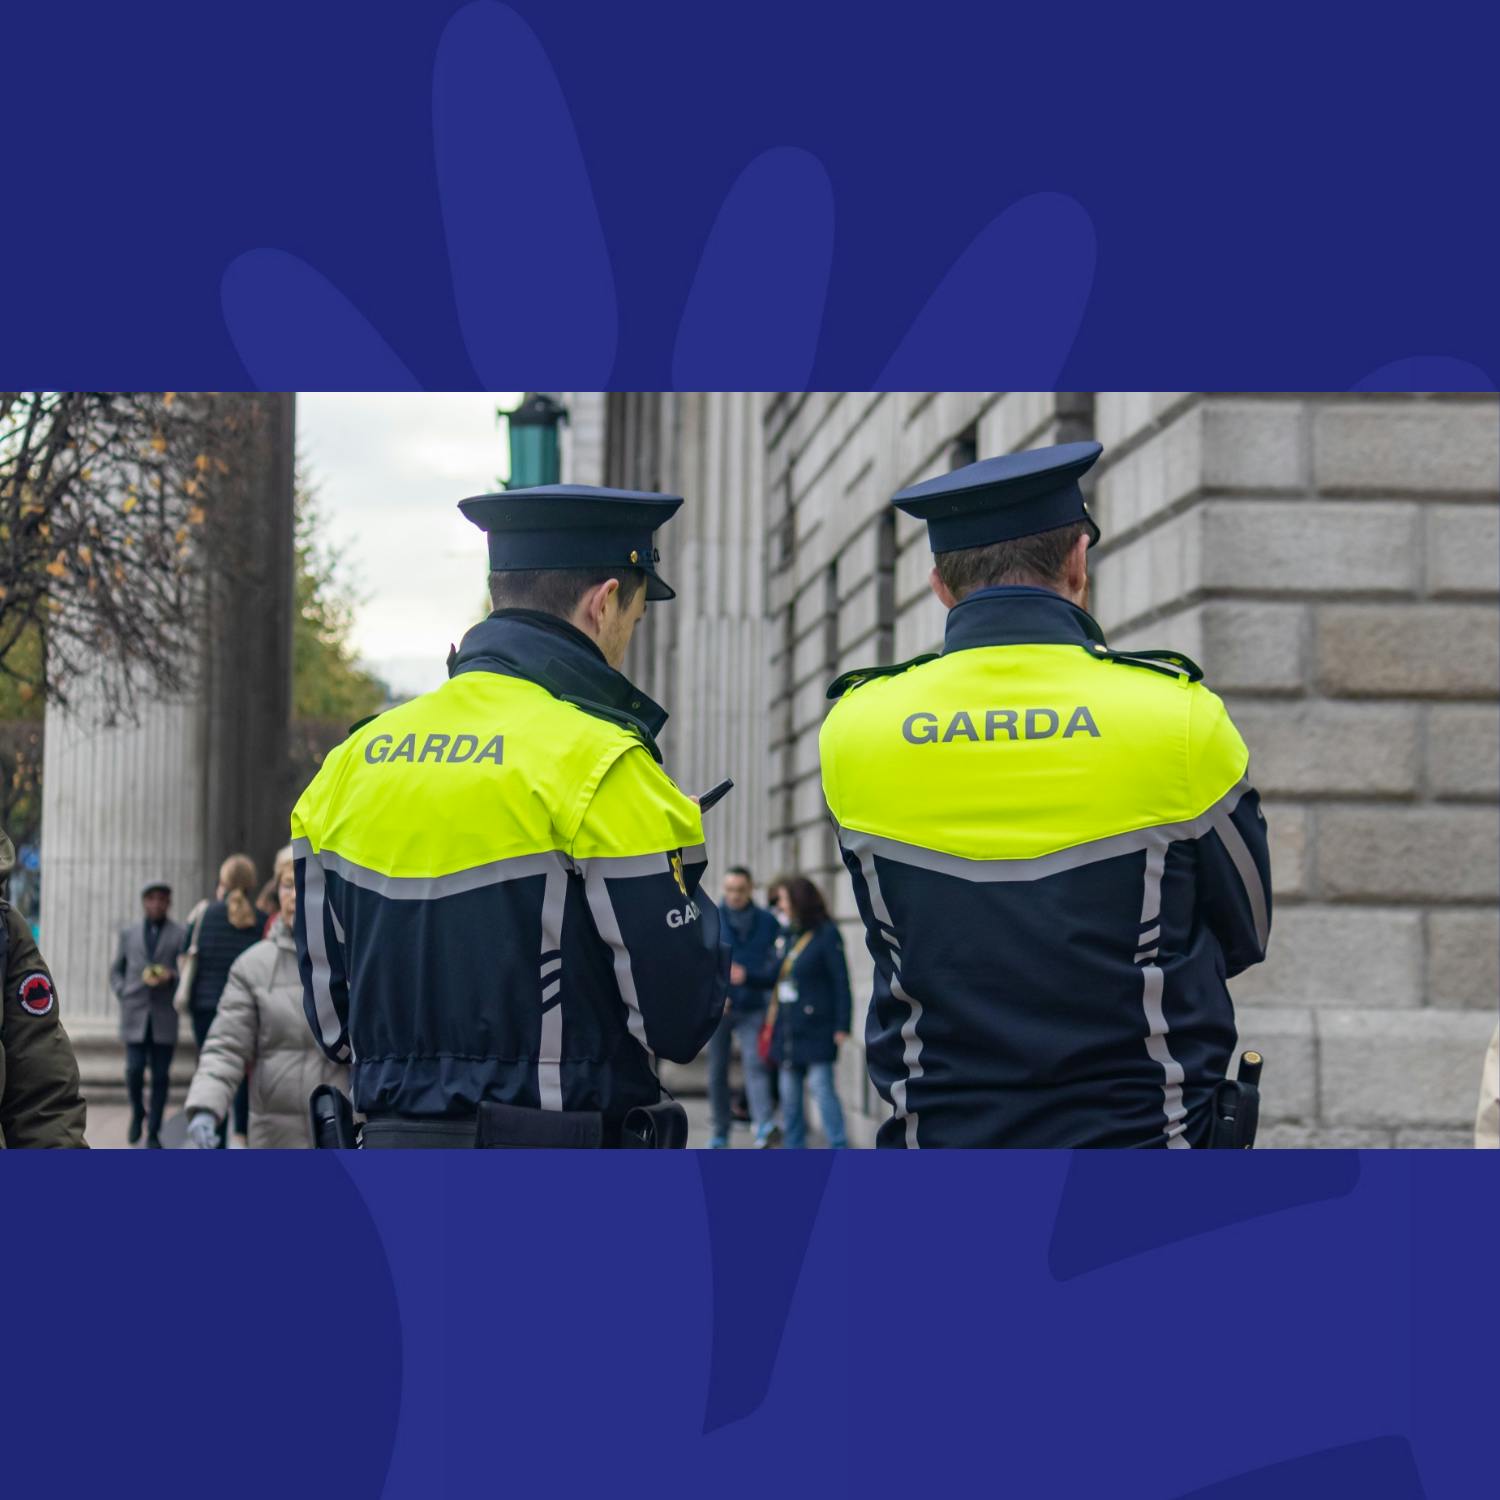 If We Have An Open Border, Why Are Gardaí Running Immigration Checks?